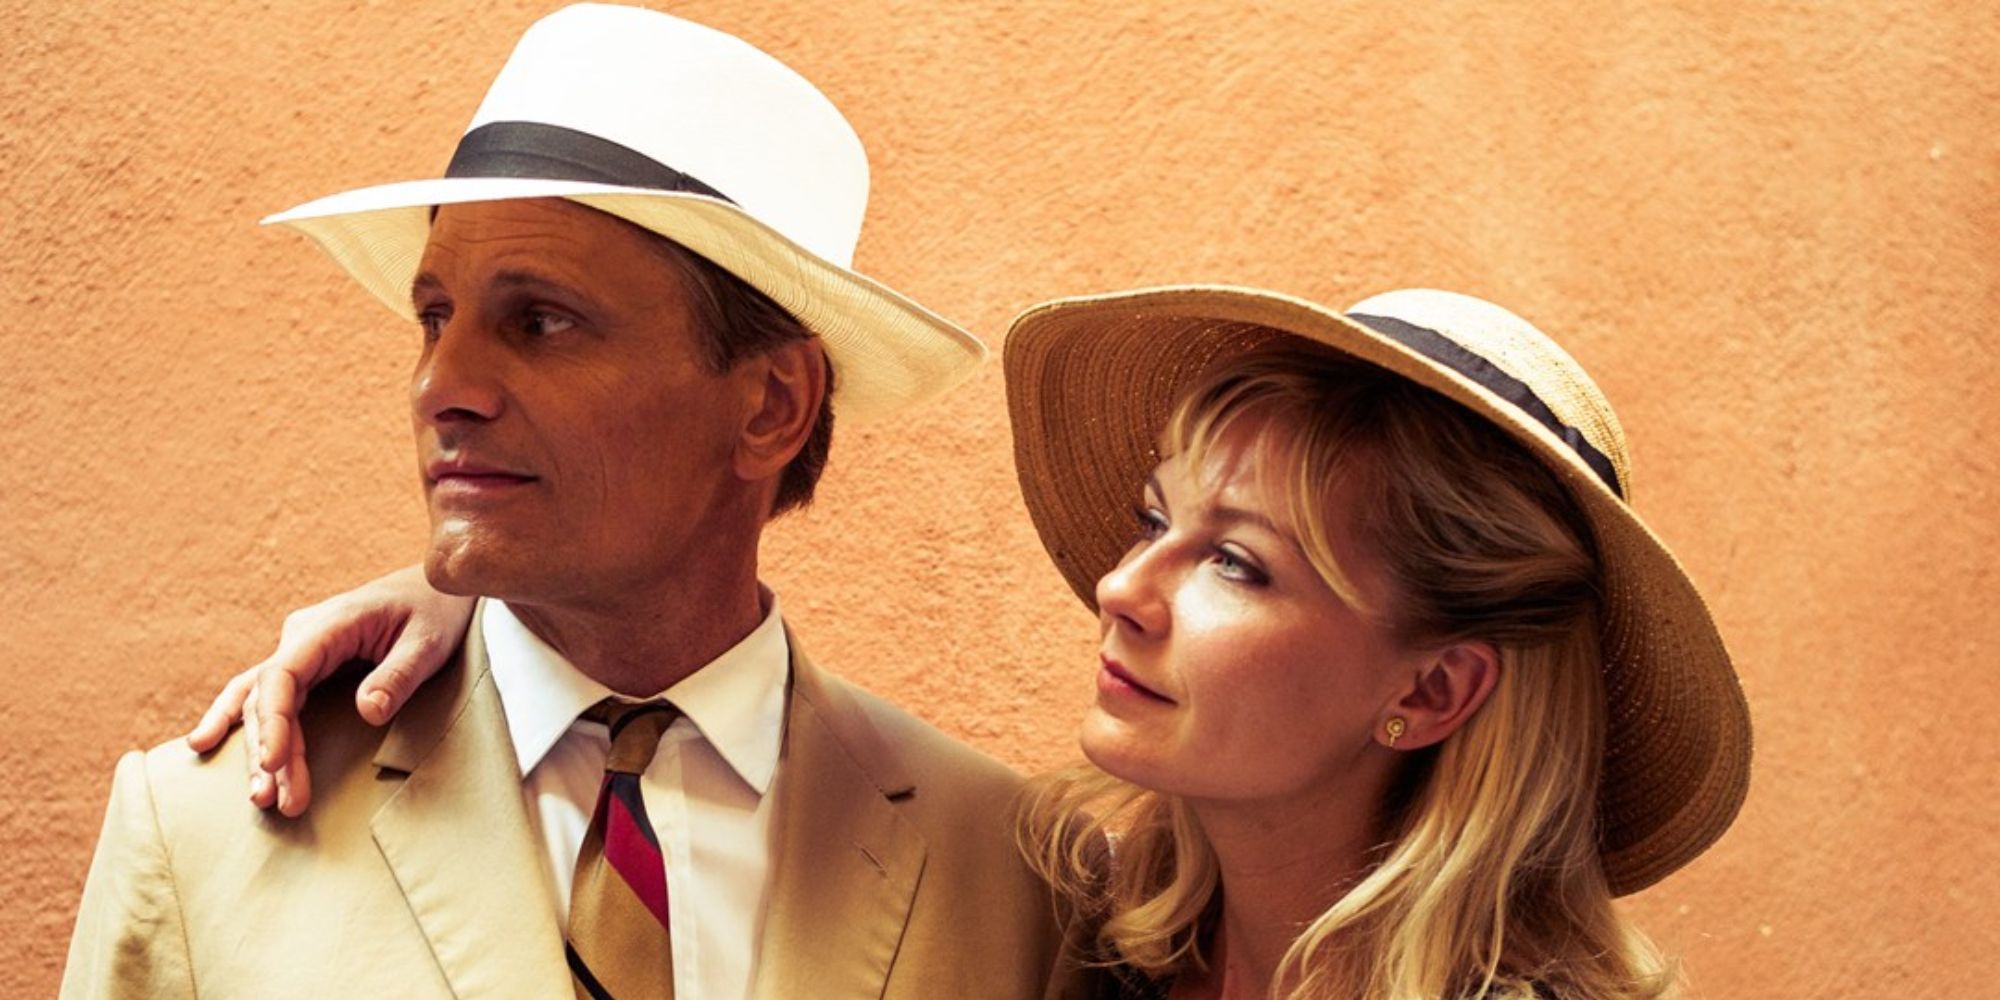 The Two Faces of January (2014) (1)